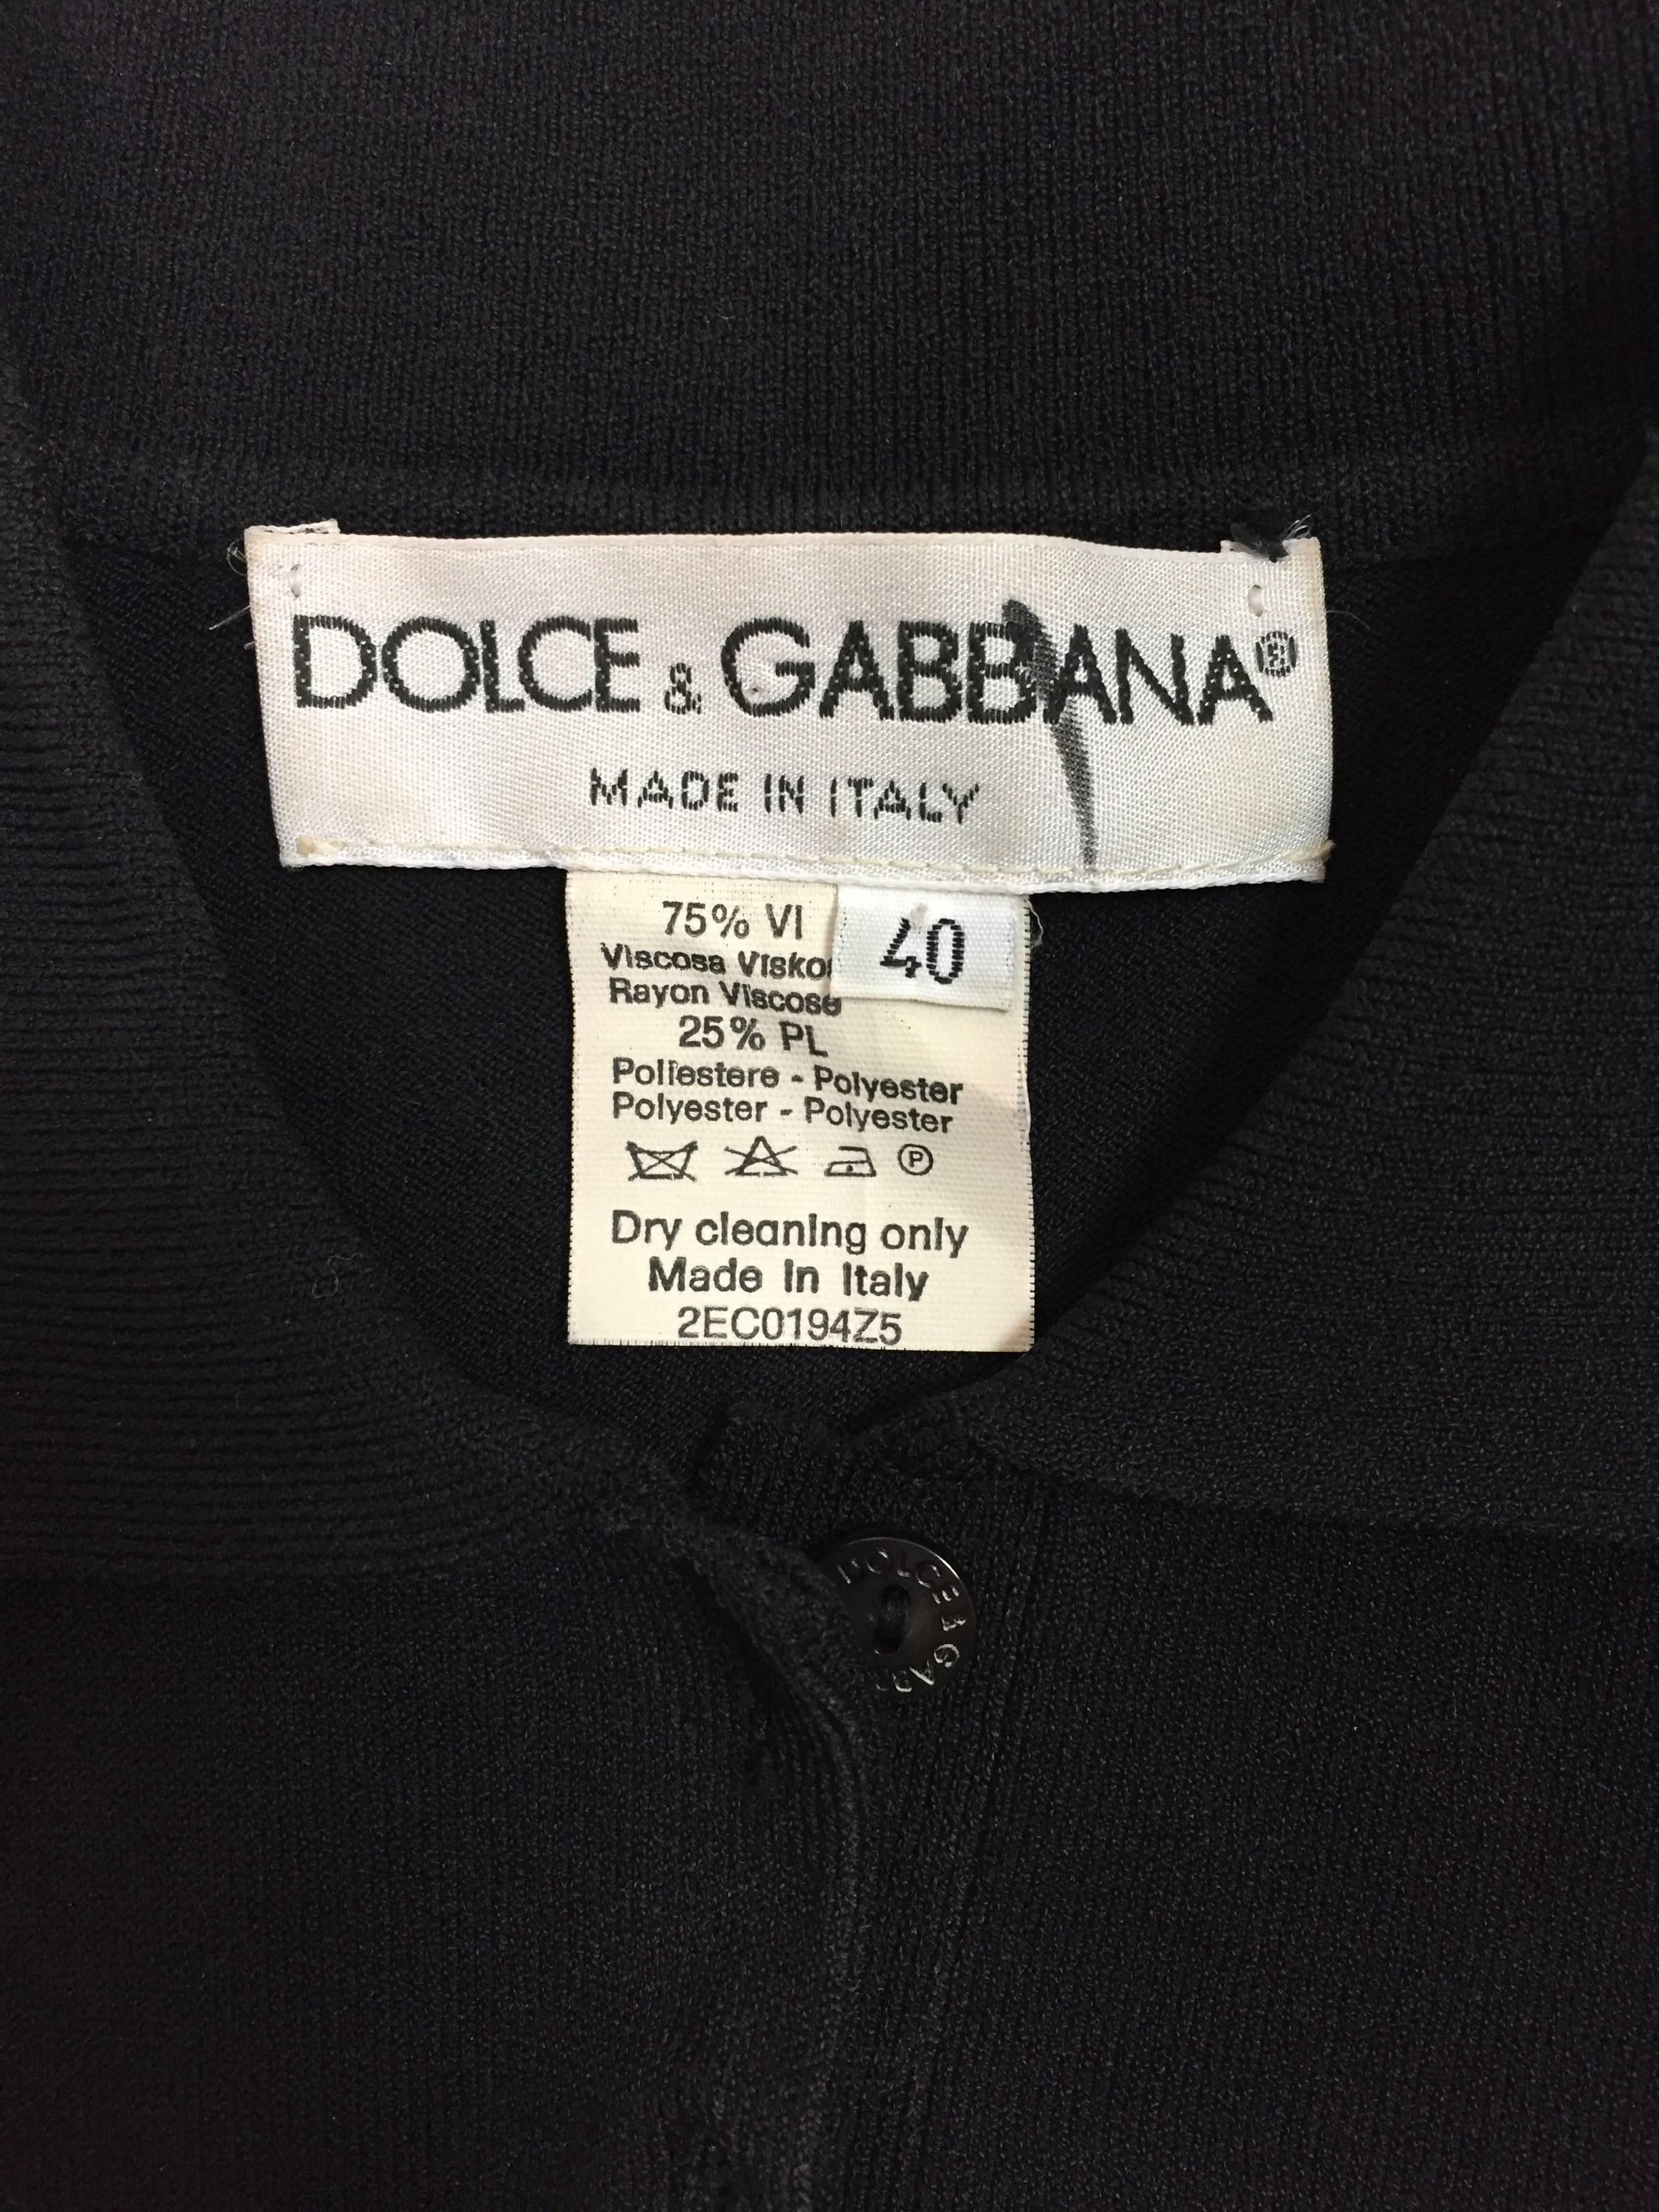 DESIGNER: 1996 Dolce & Gabbana

Please contact for more information and/or photos.

CONDITION: Excellent

MATERIAL: Top is a stretchy viscose & polyester knit- Leggings are acetate/nylon/elastane

COUNTRY MADE: Italy

SIZE: Top size 40-